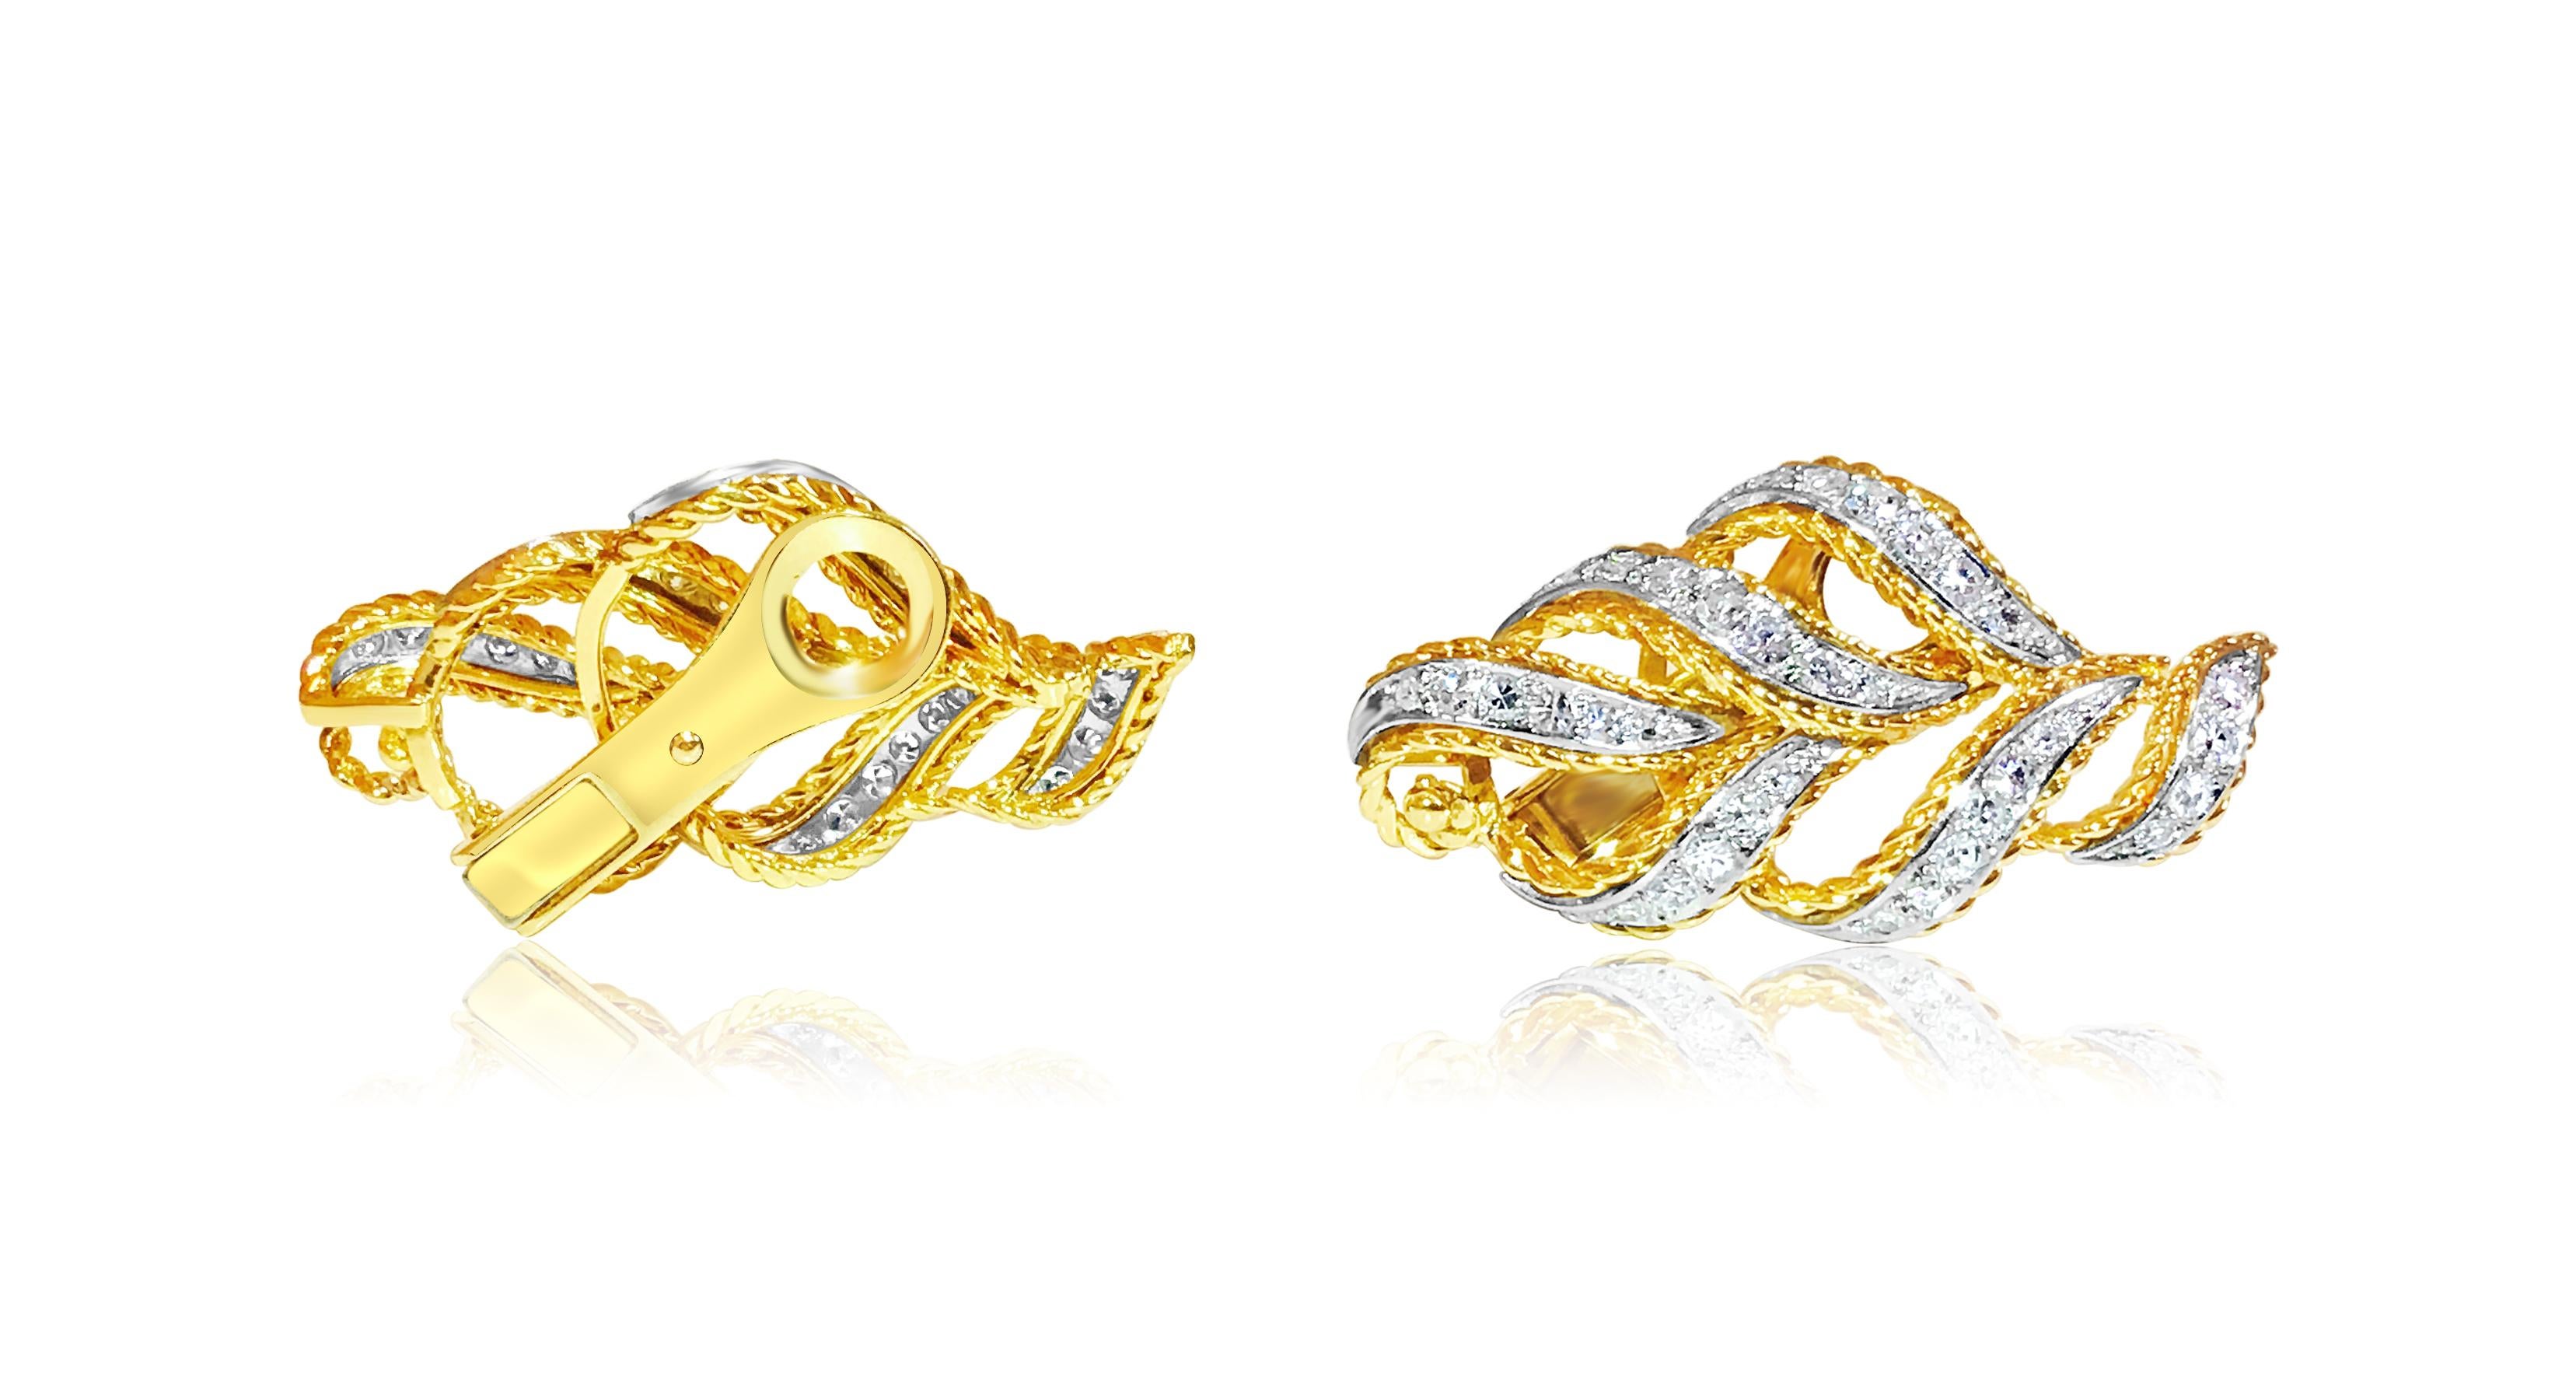 14K yellow gold. 

TCW of diamonds: 2.00 carats. Round Cut. VS clarity and G color. Clip on earrings. 

Gorgeous leaf motif. Superb luster in diamonds. Nice shine. 